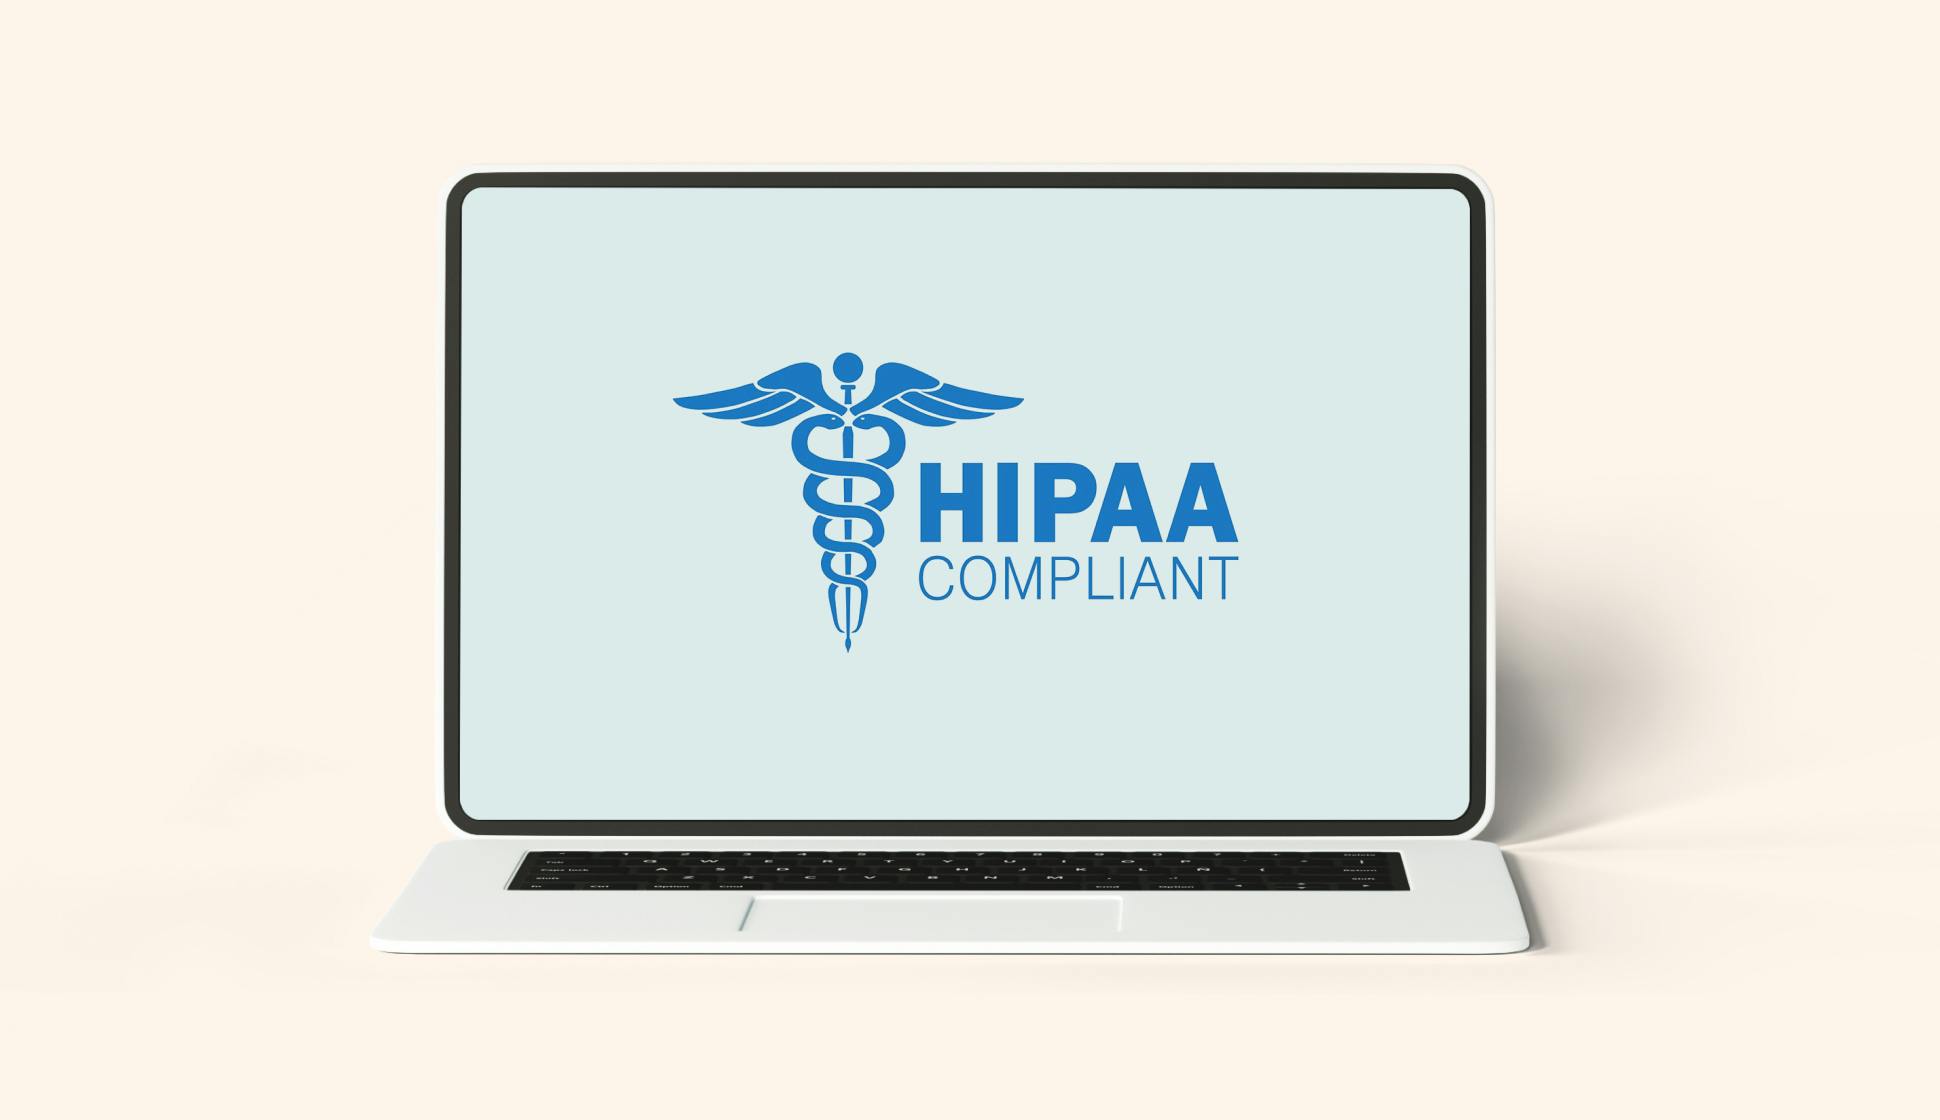 Laptop with a hipaa compliant logo on the screen